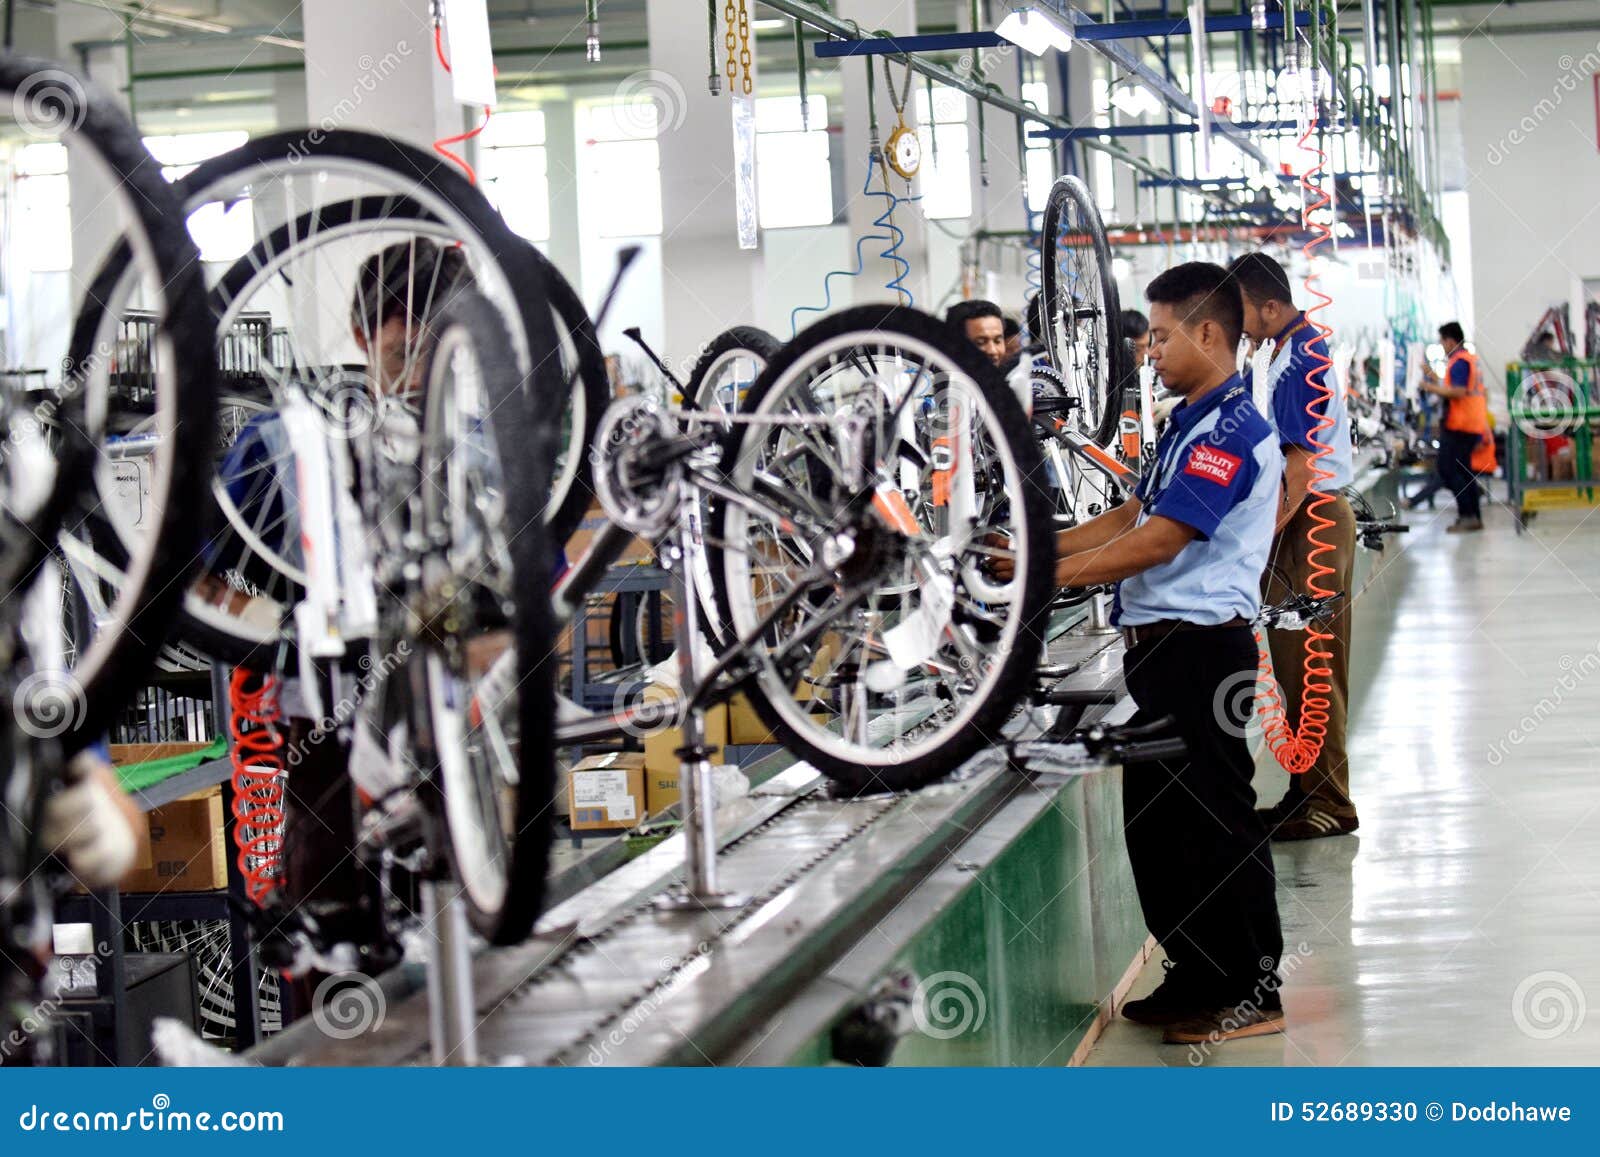 Assembly Bicycle Bike From Indonesia Editorial Image Image Of Sena Assemblers 52689330